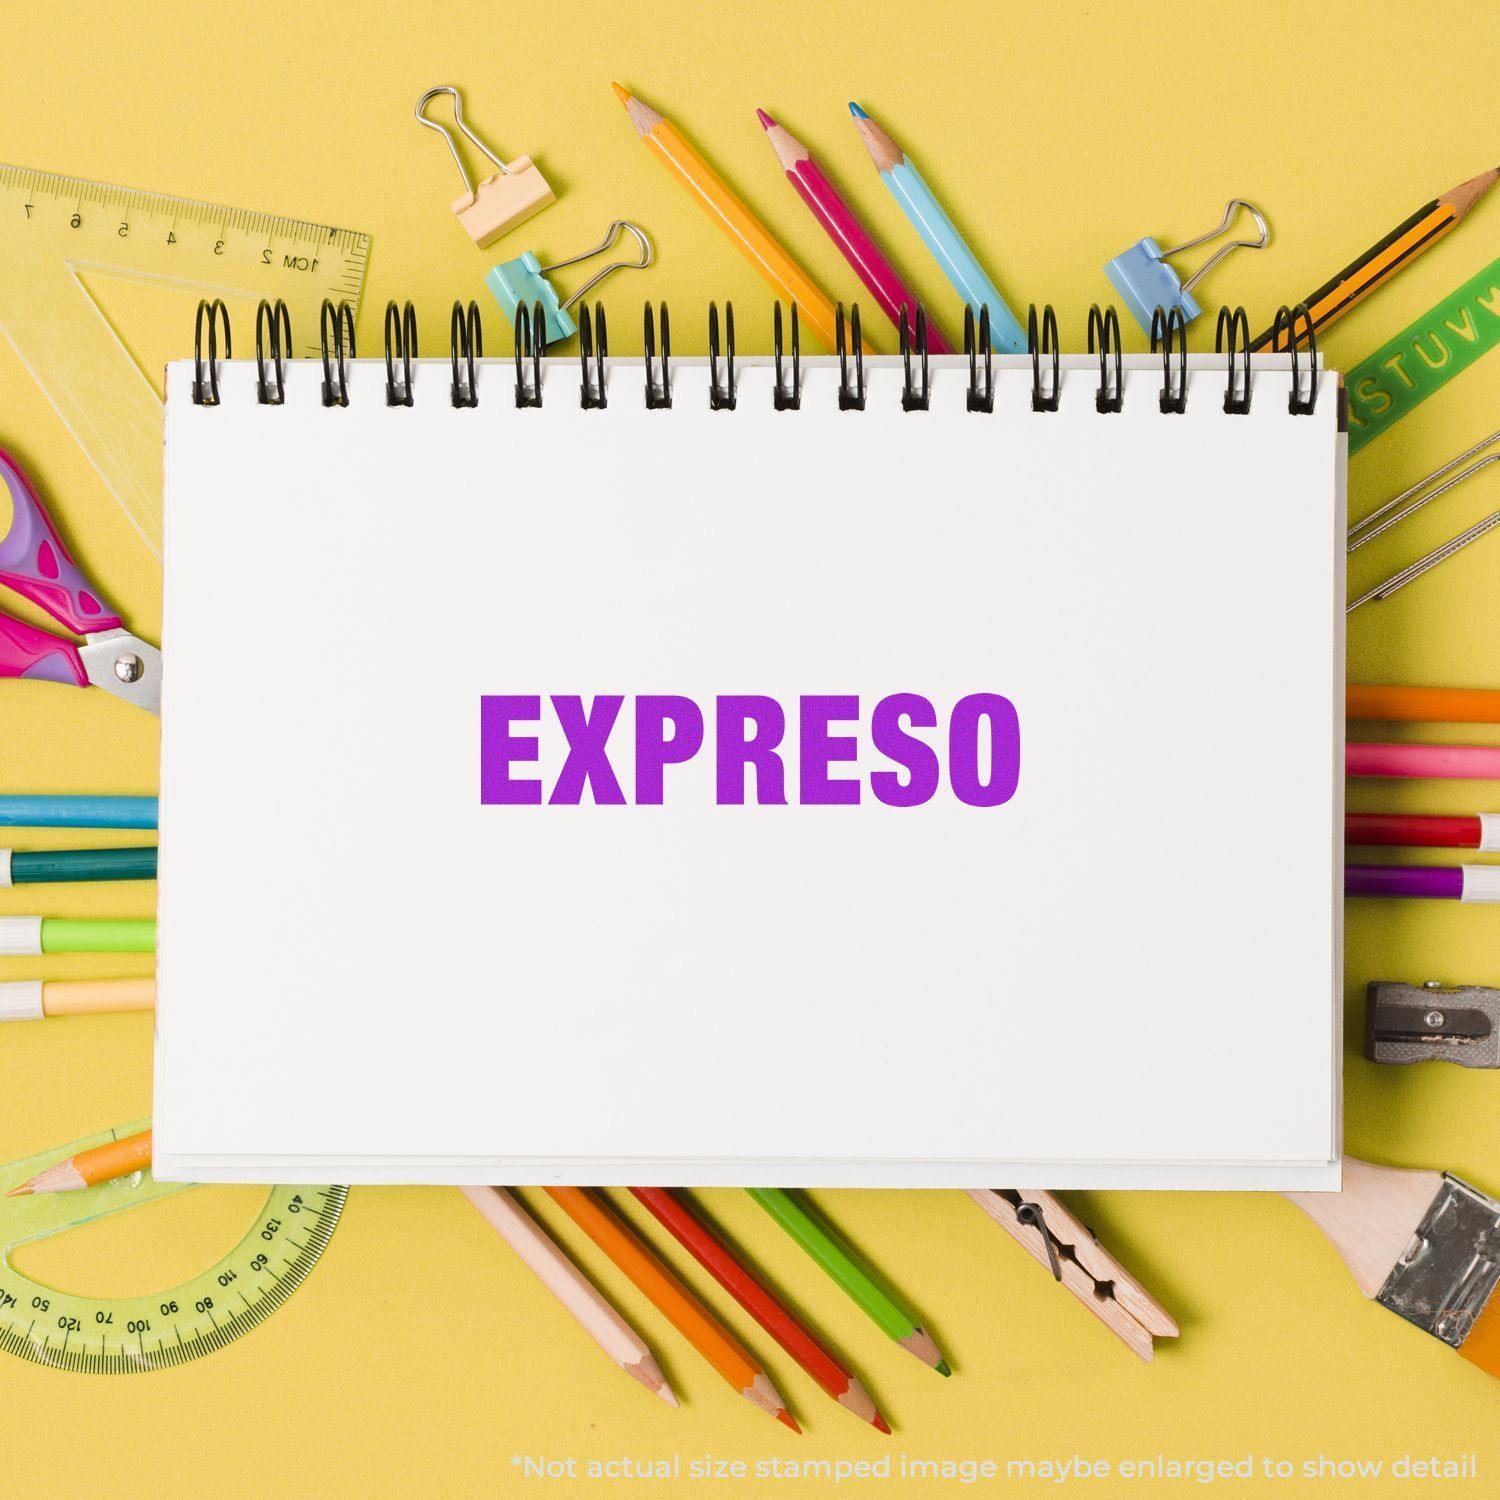 A self-inking stamp with a stamped image showing how the text "EXPRESO" is displayed after stamping.